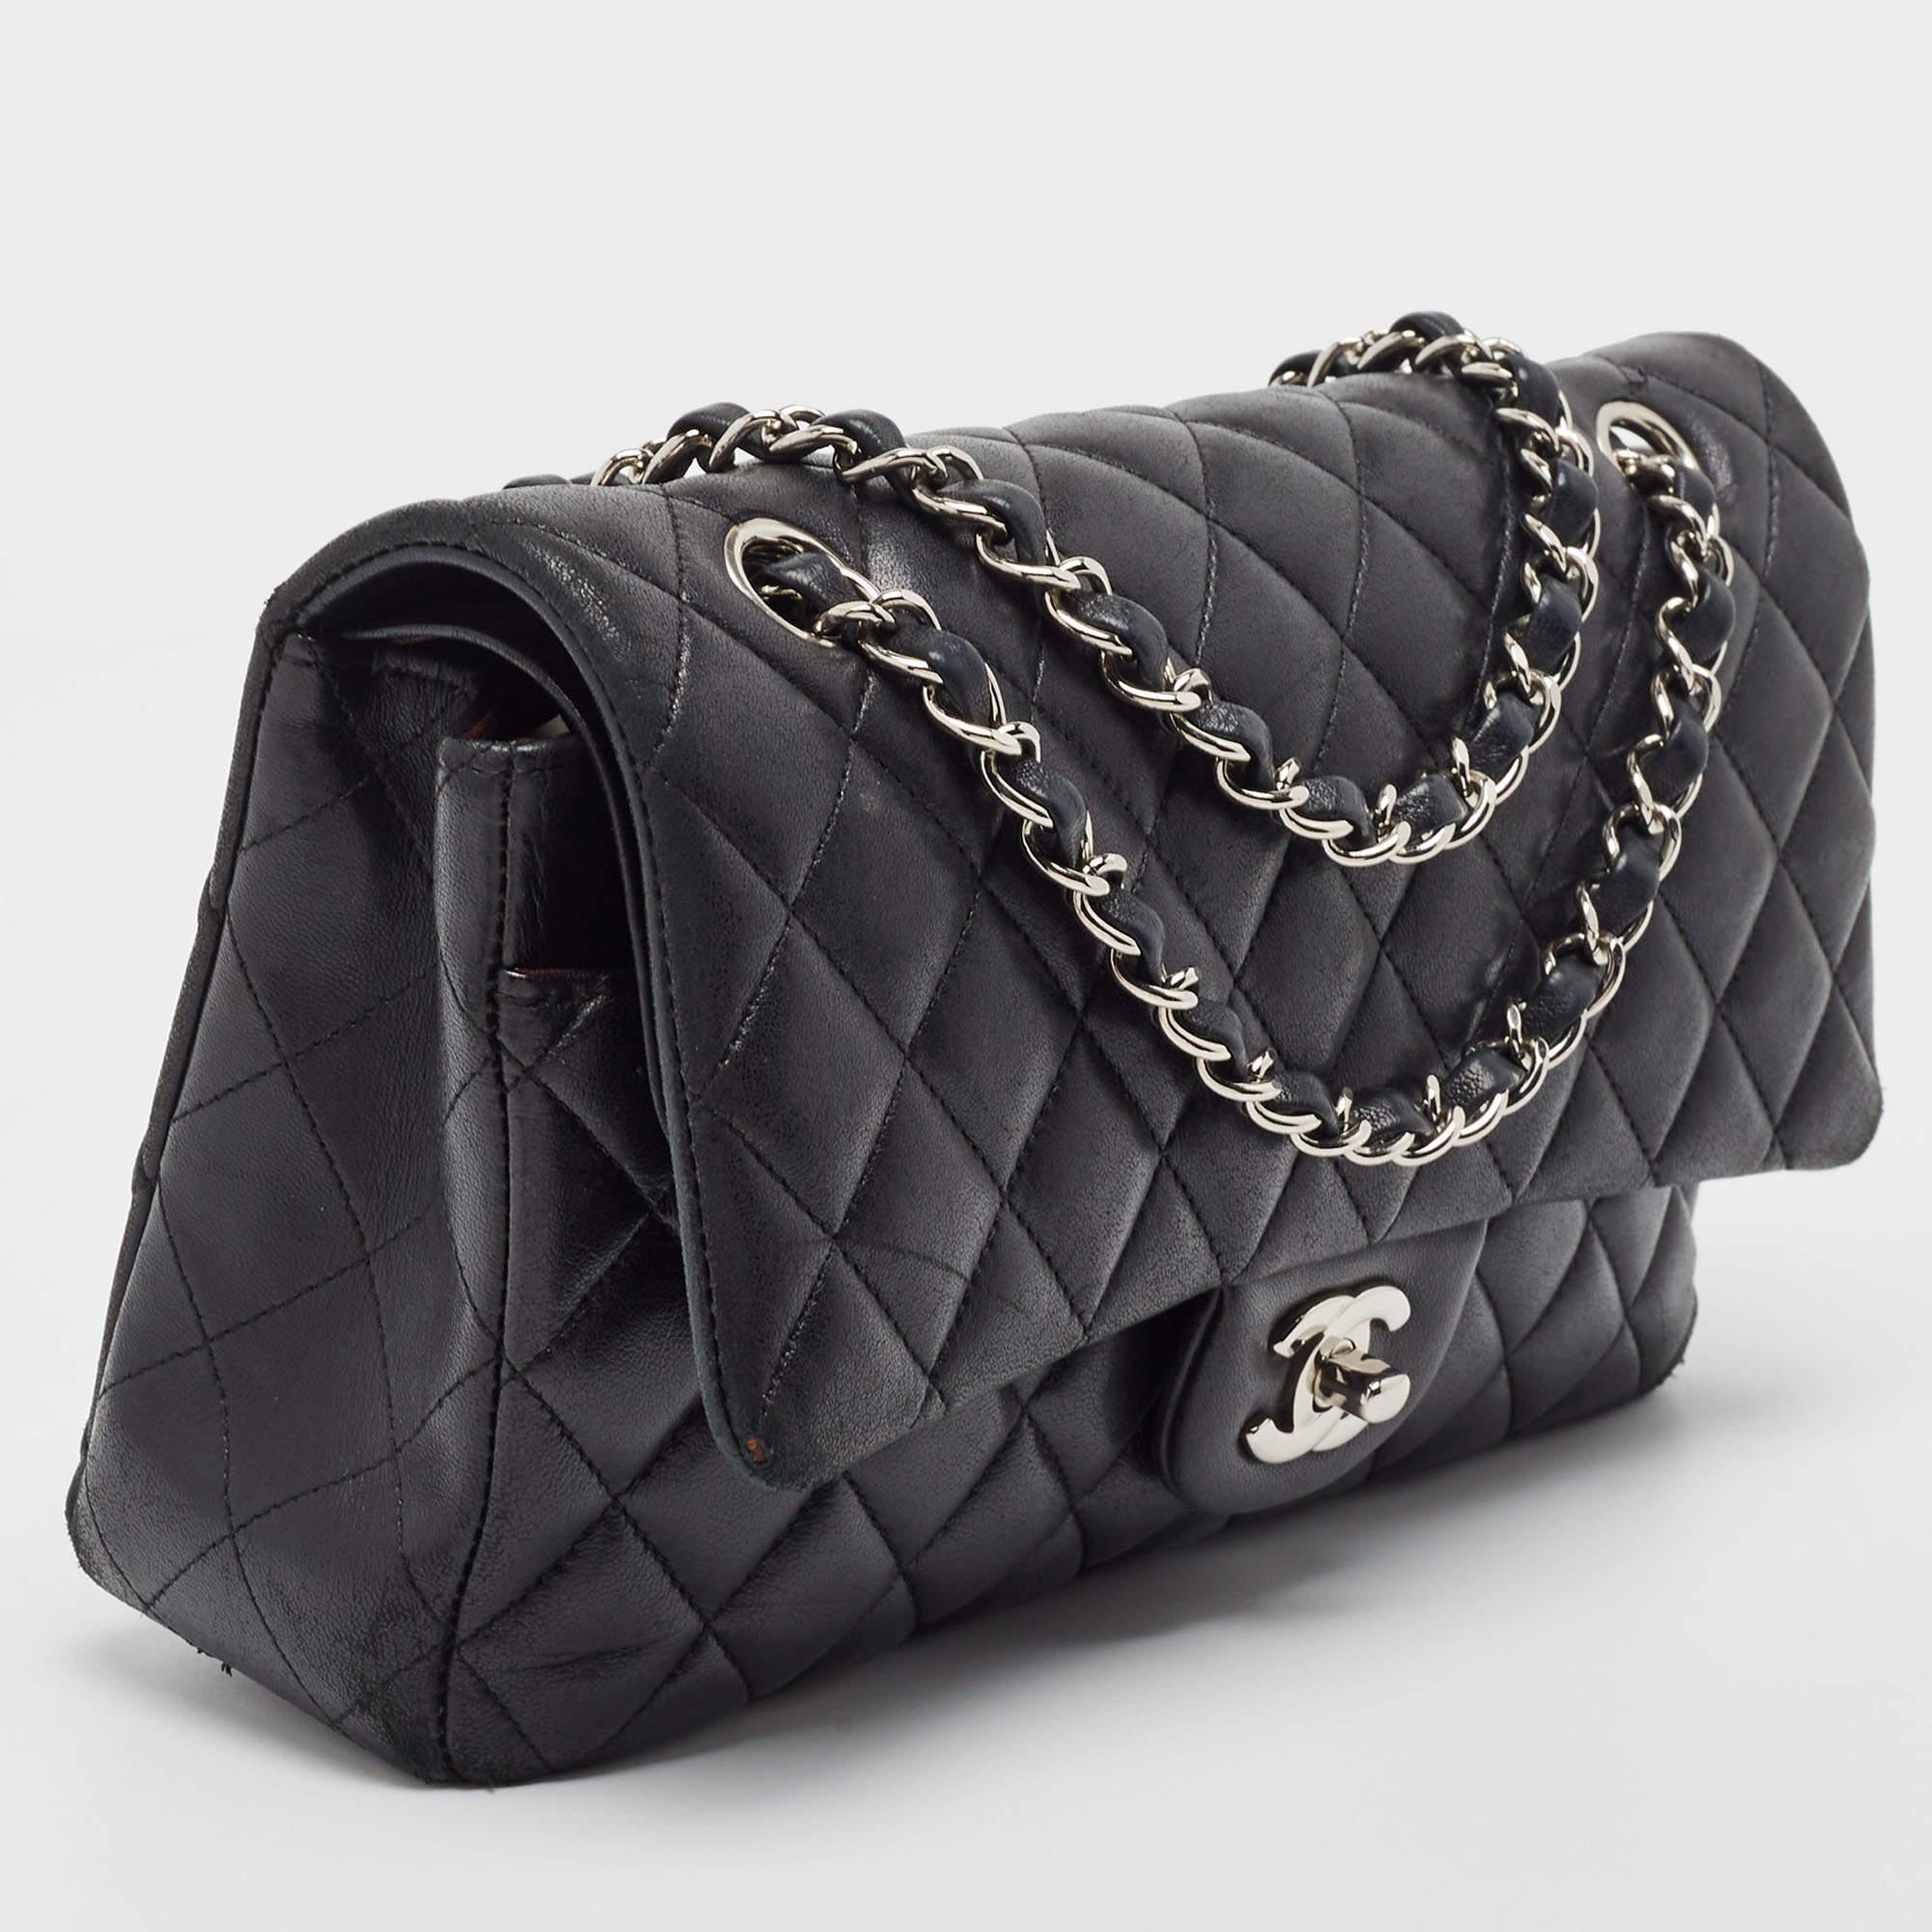 Women's Chanel Black Quilted Leather Small CC Turnlock Full Double Flap Bag